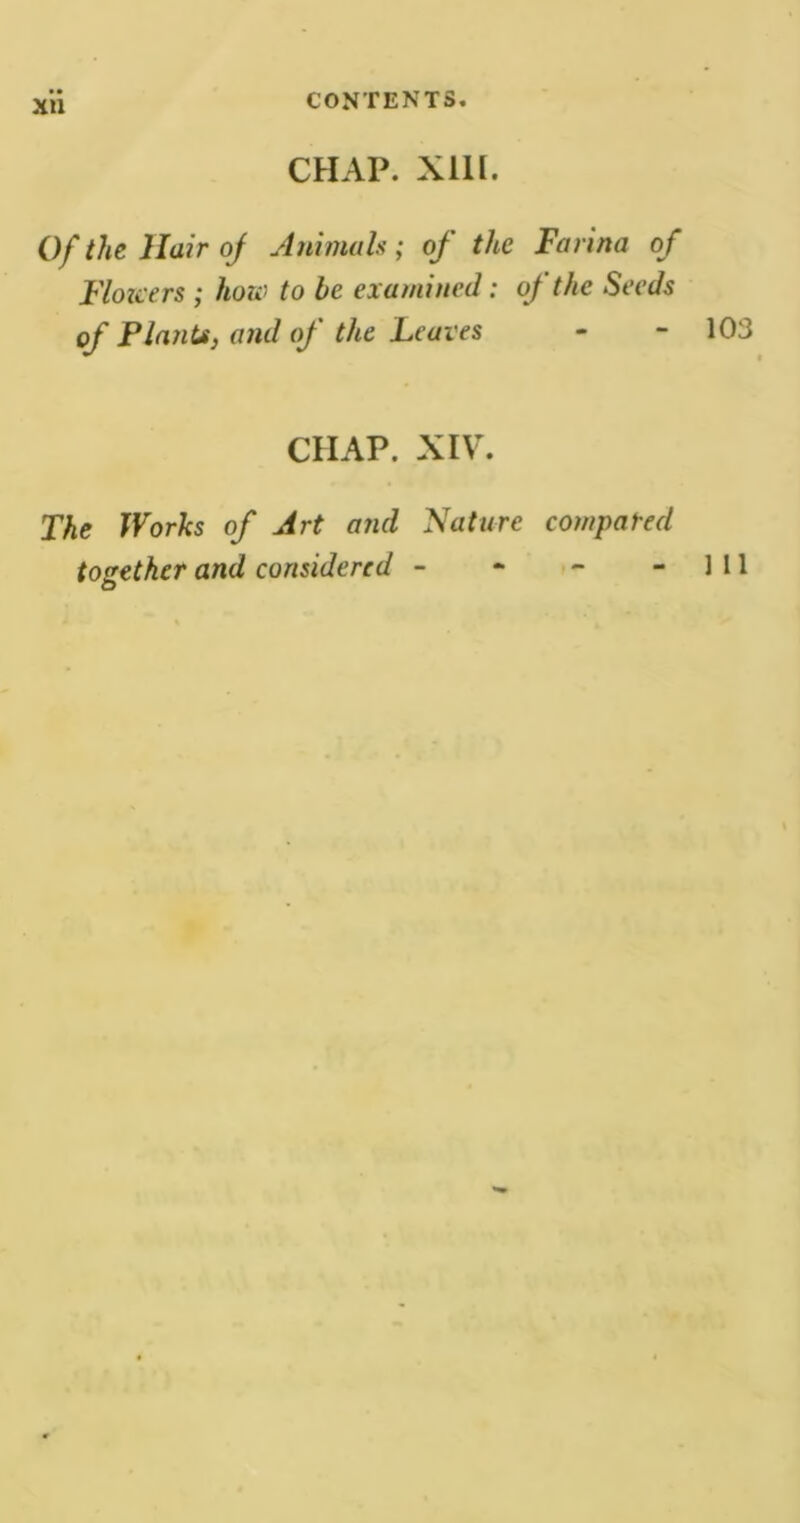 XU CHAP. XUI. Of the Hair of Animals; of the Farina of Flowers ; how to be examined: of the Seeds of Plants, and of the Leaves - - 103 CHAP. XIV. The Works of Art and Nature compared together and considered - - - -111